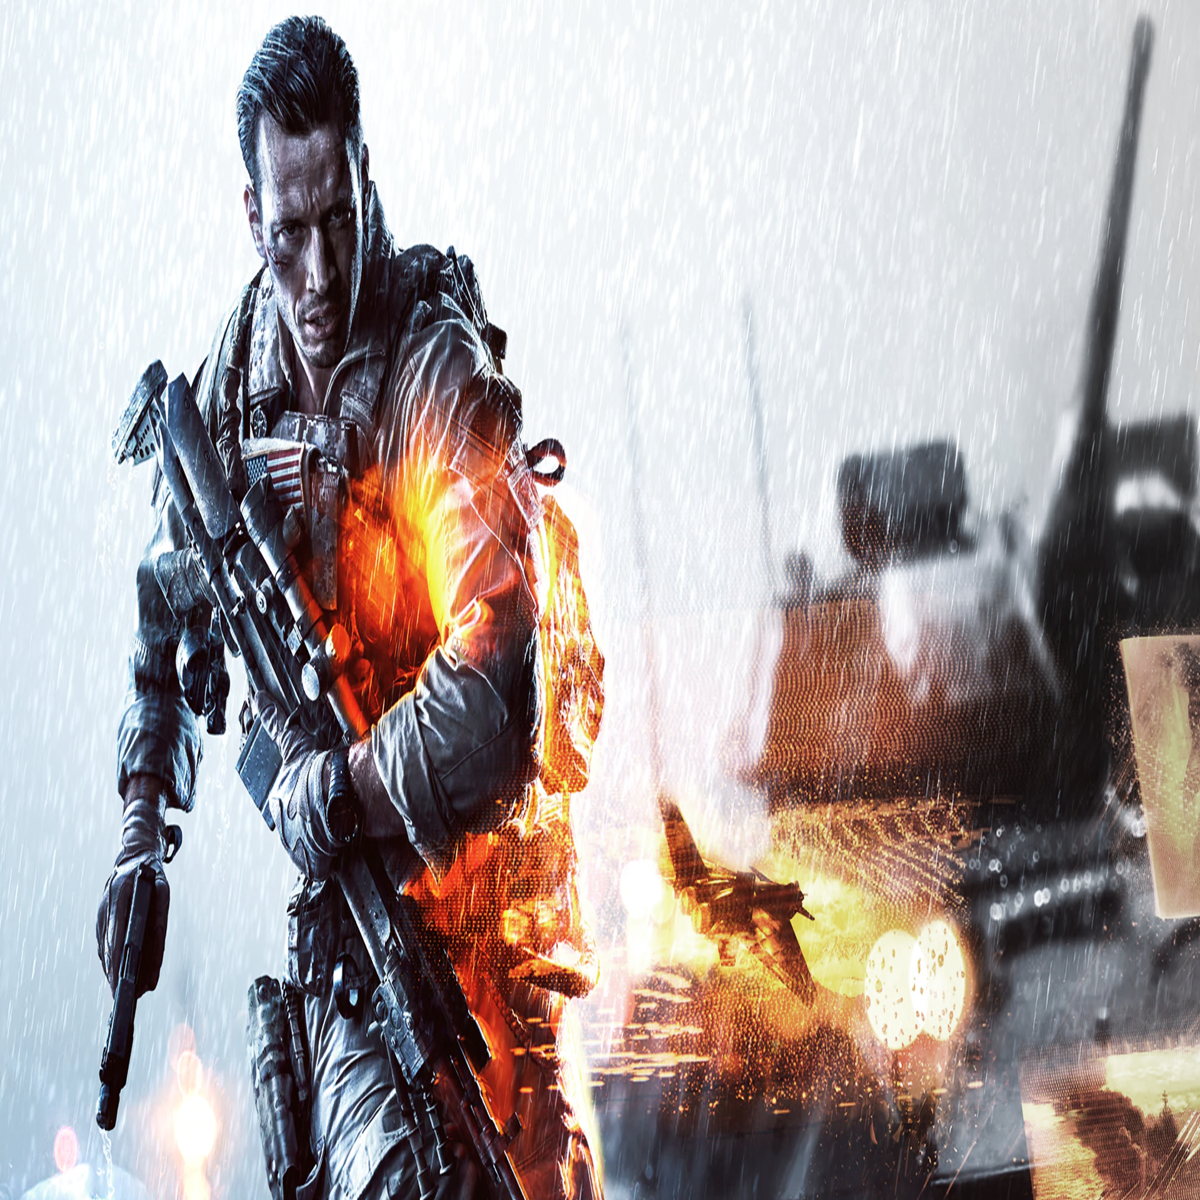 So Many People Are Playing Battlefield 4 Again That EA Is